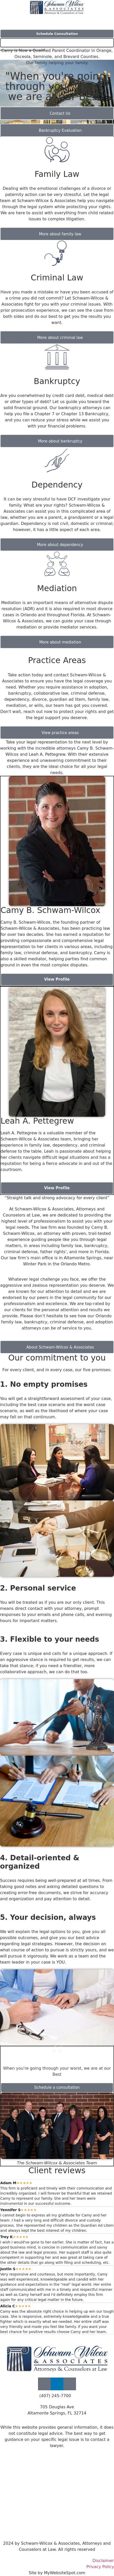 Schwam-Wilcox & Associates, Attorneys and Counselors at Law - Ocala FL Lawyers